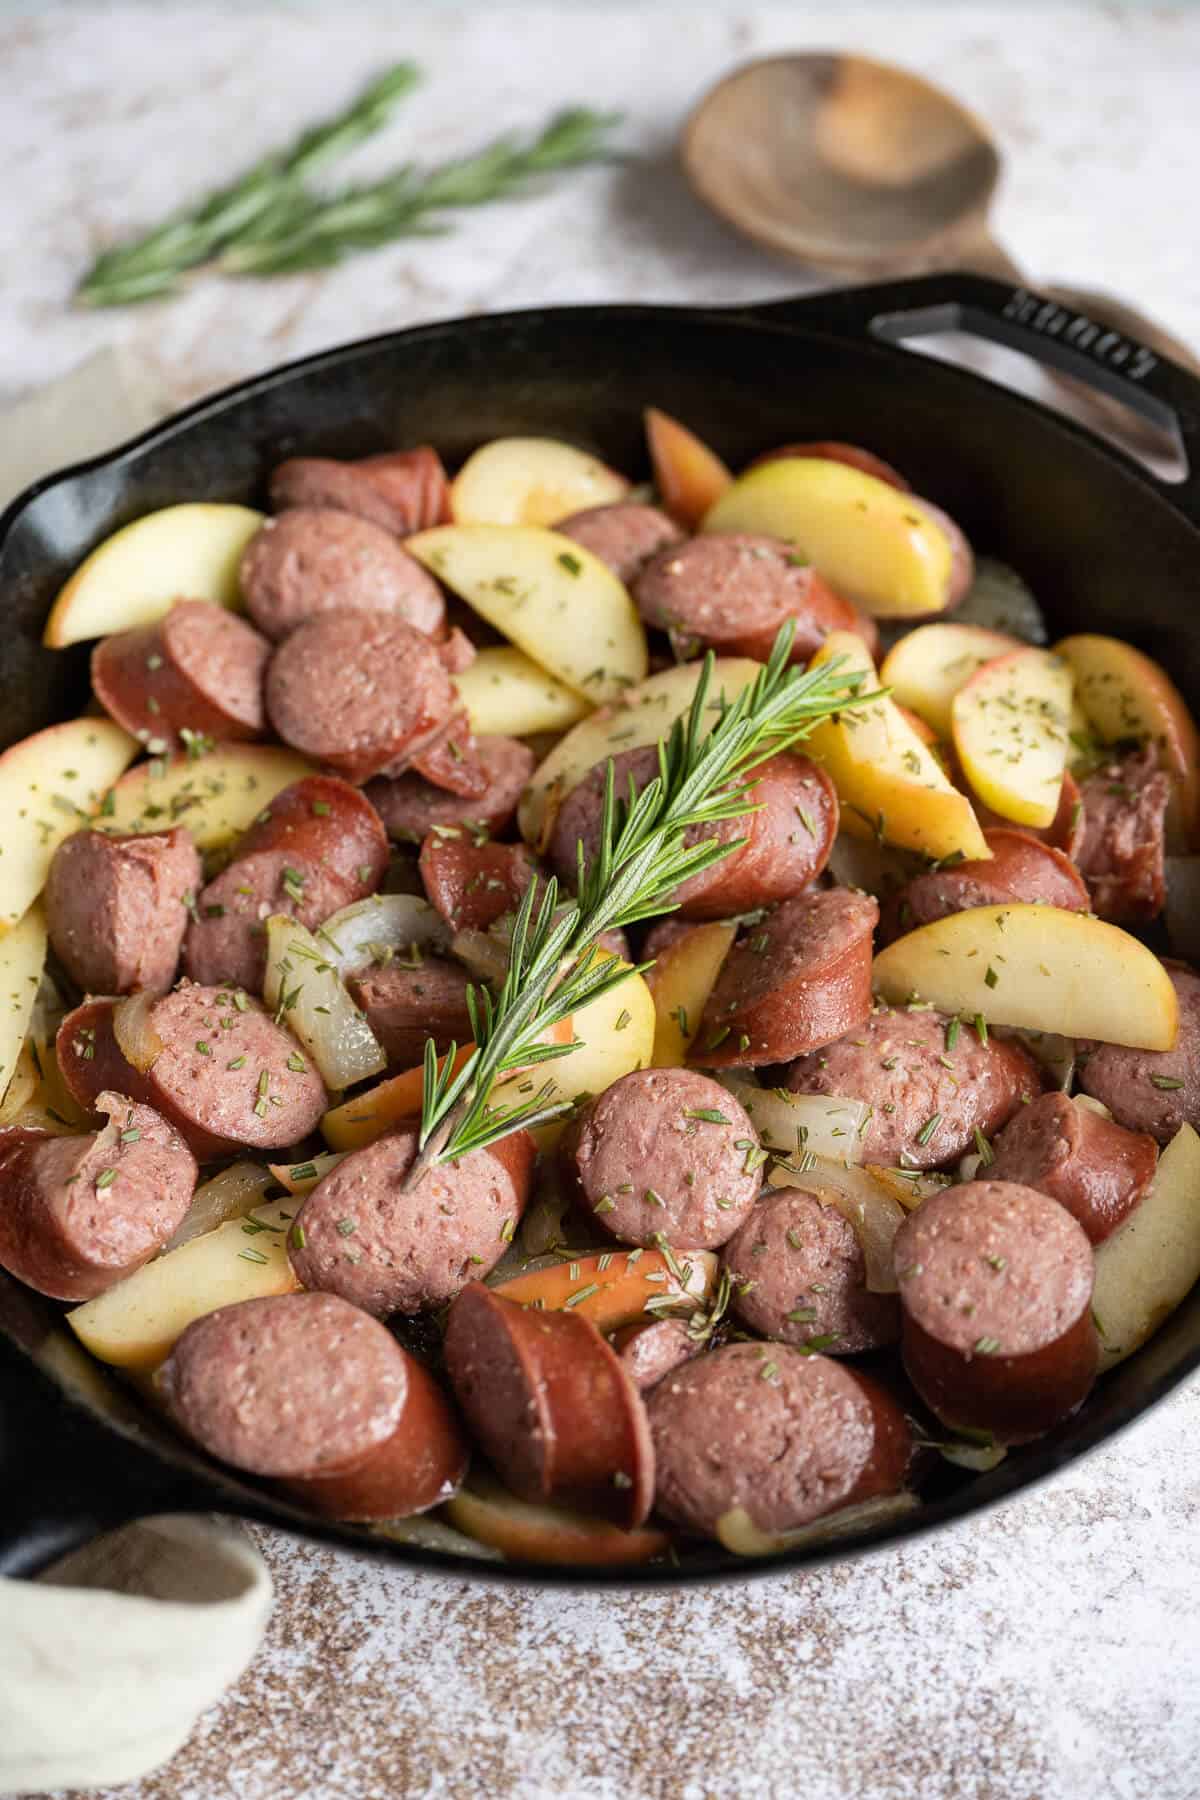 Sliced kielbasa, apples, and onions in a cast iron skillet with a rosemary spring on top.